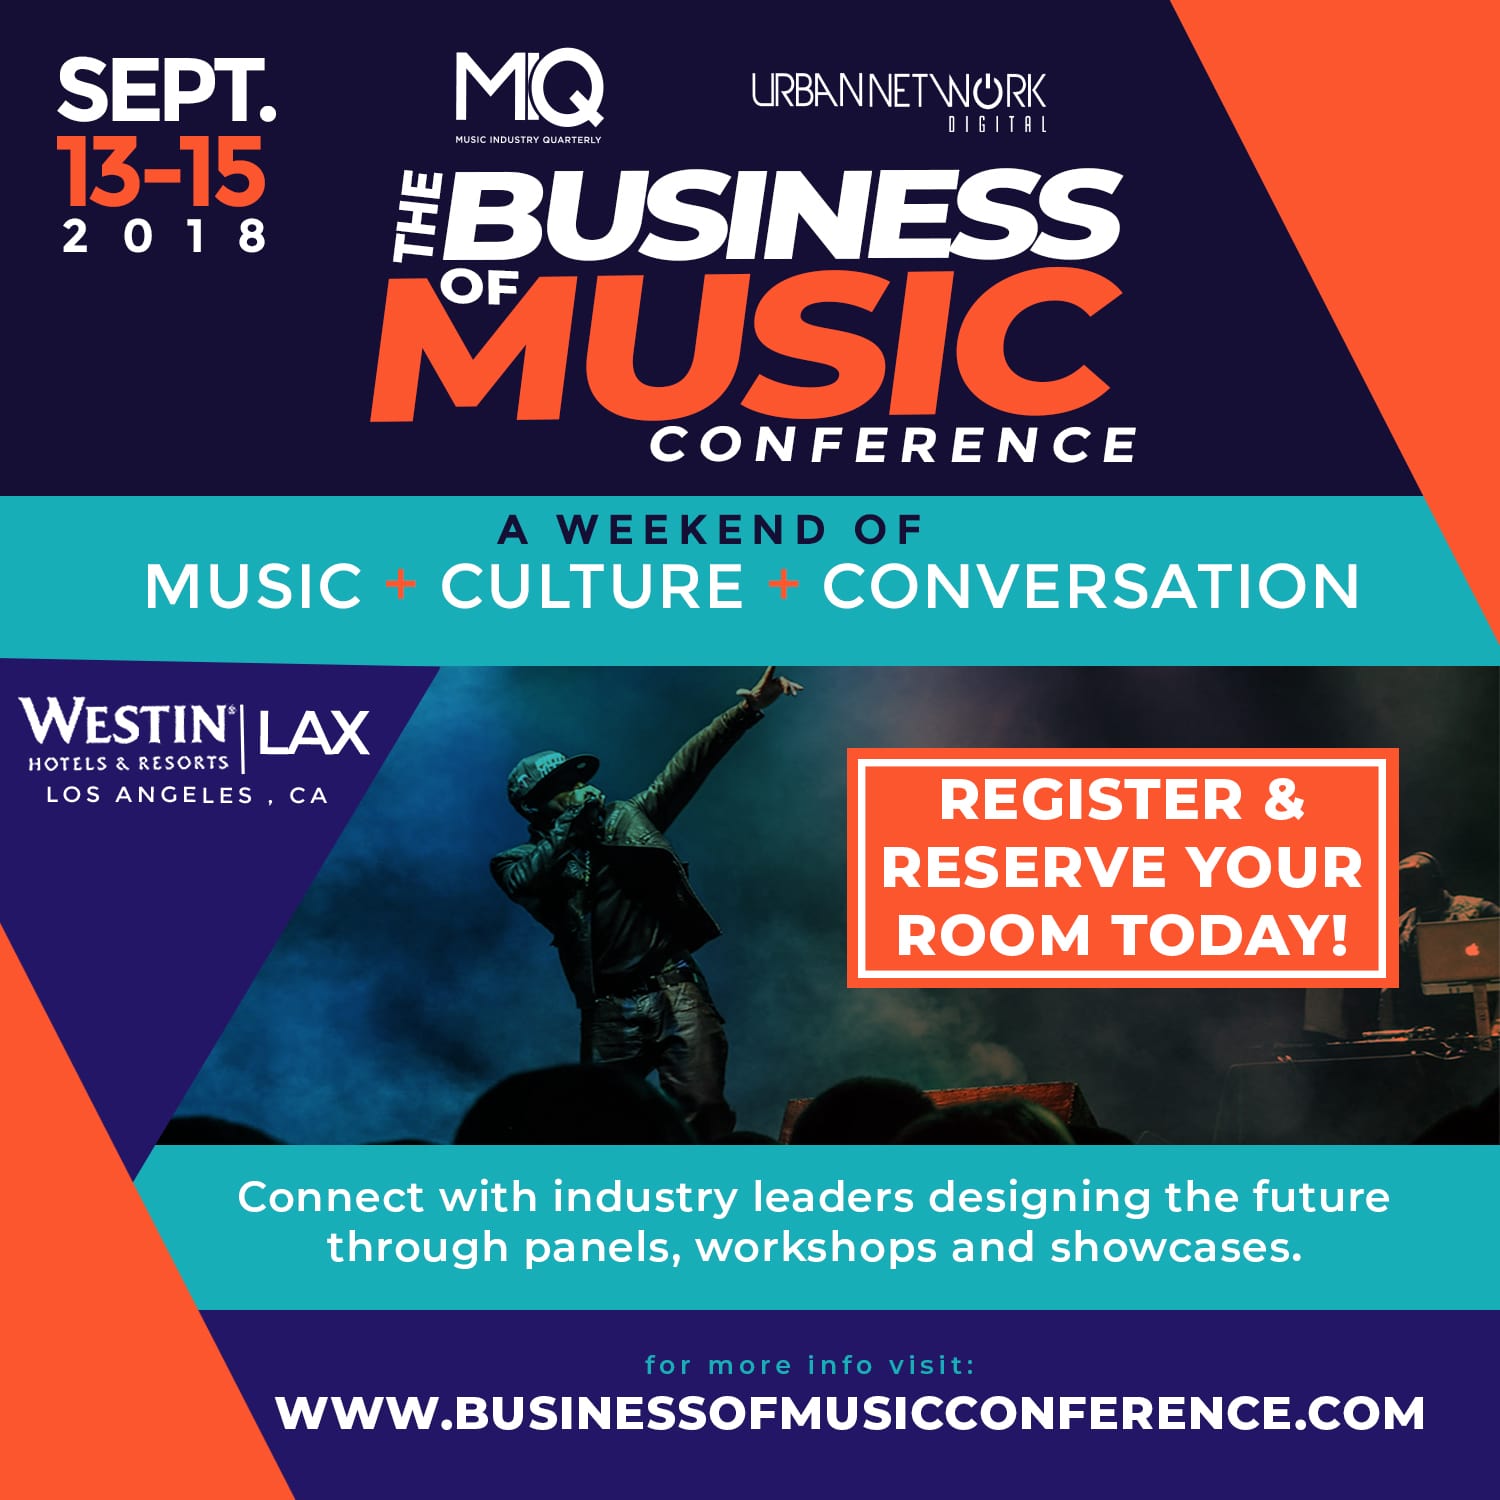 Music Industry Quarterly and Urban Network Digital Present the Business